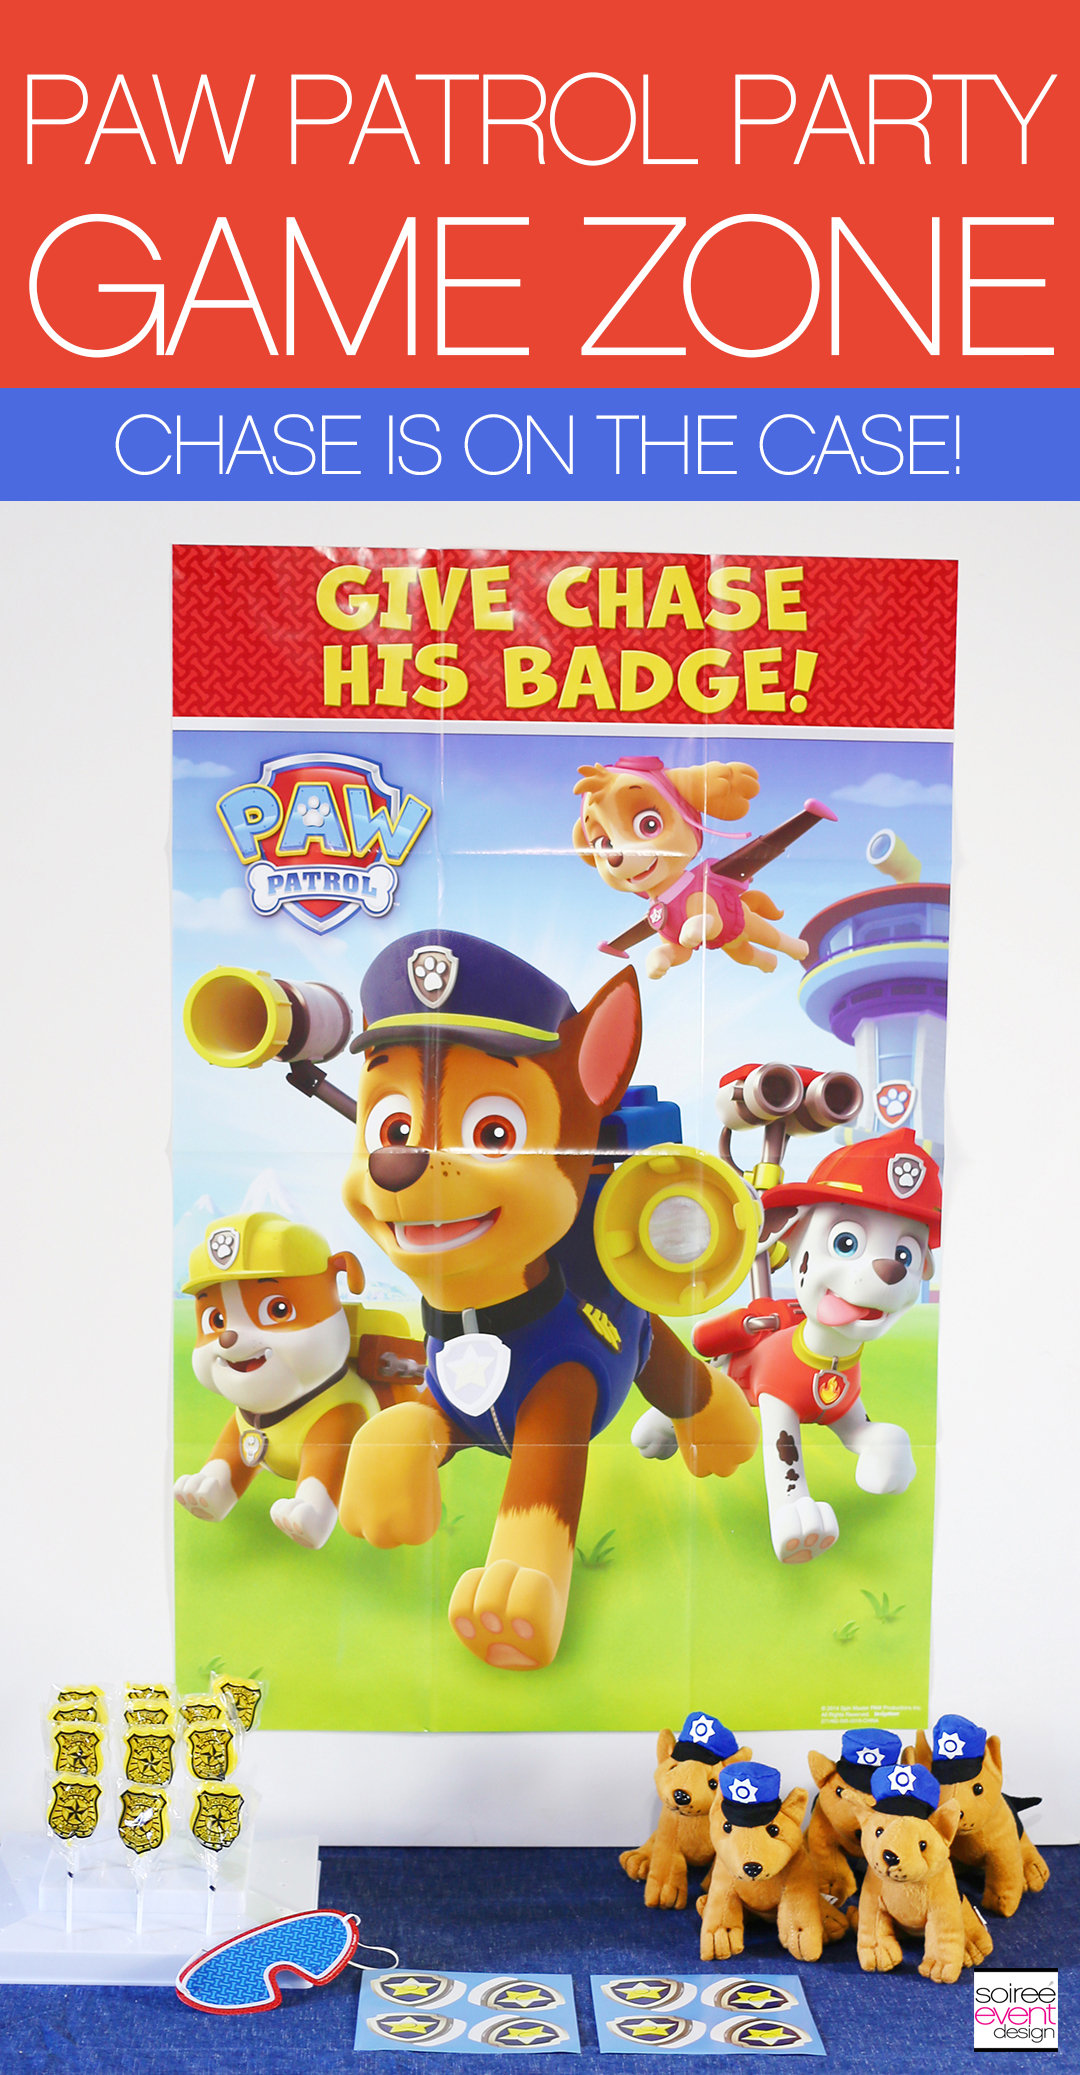 Paw Patrol Party Games - Chase is on the Case